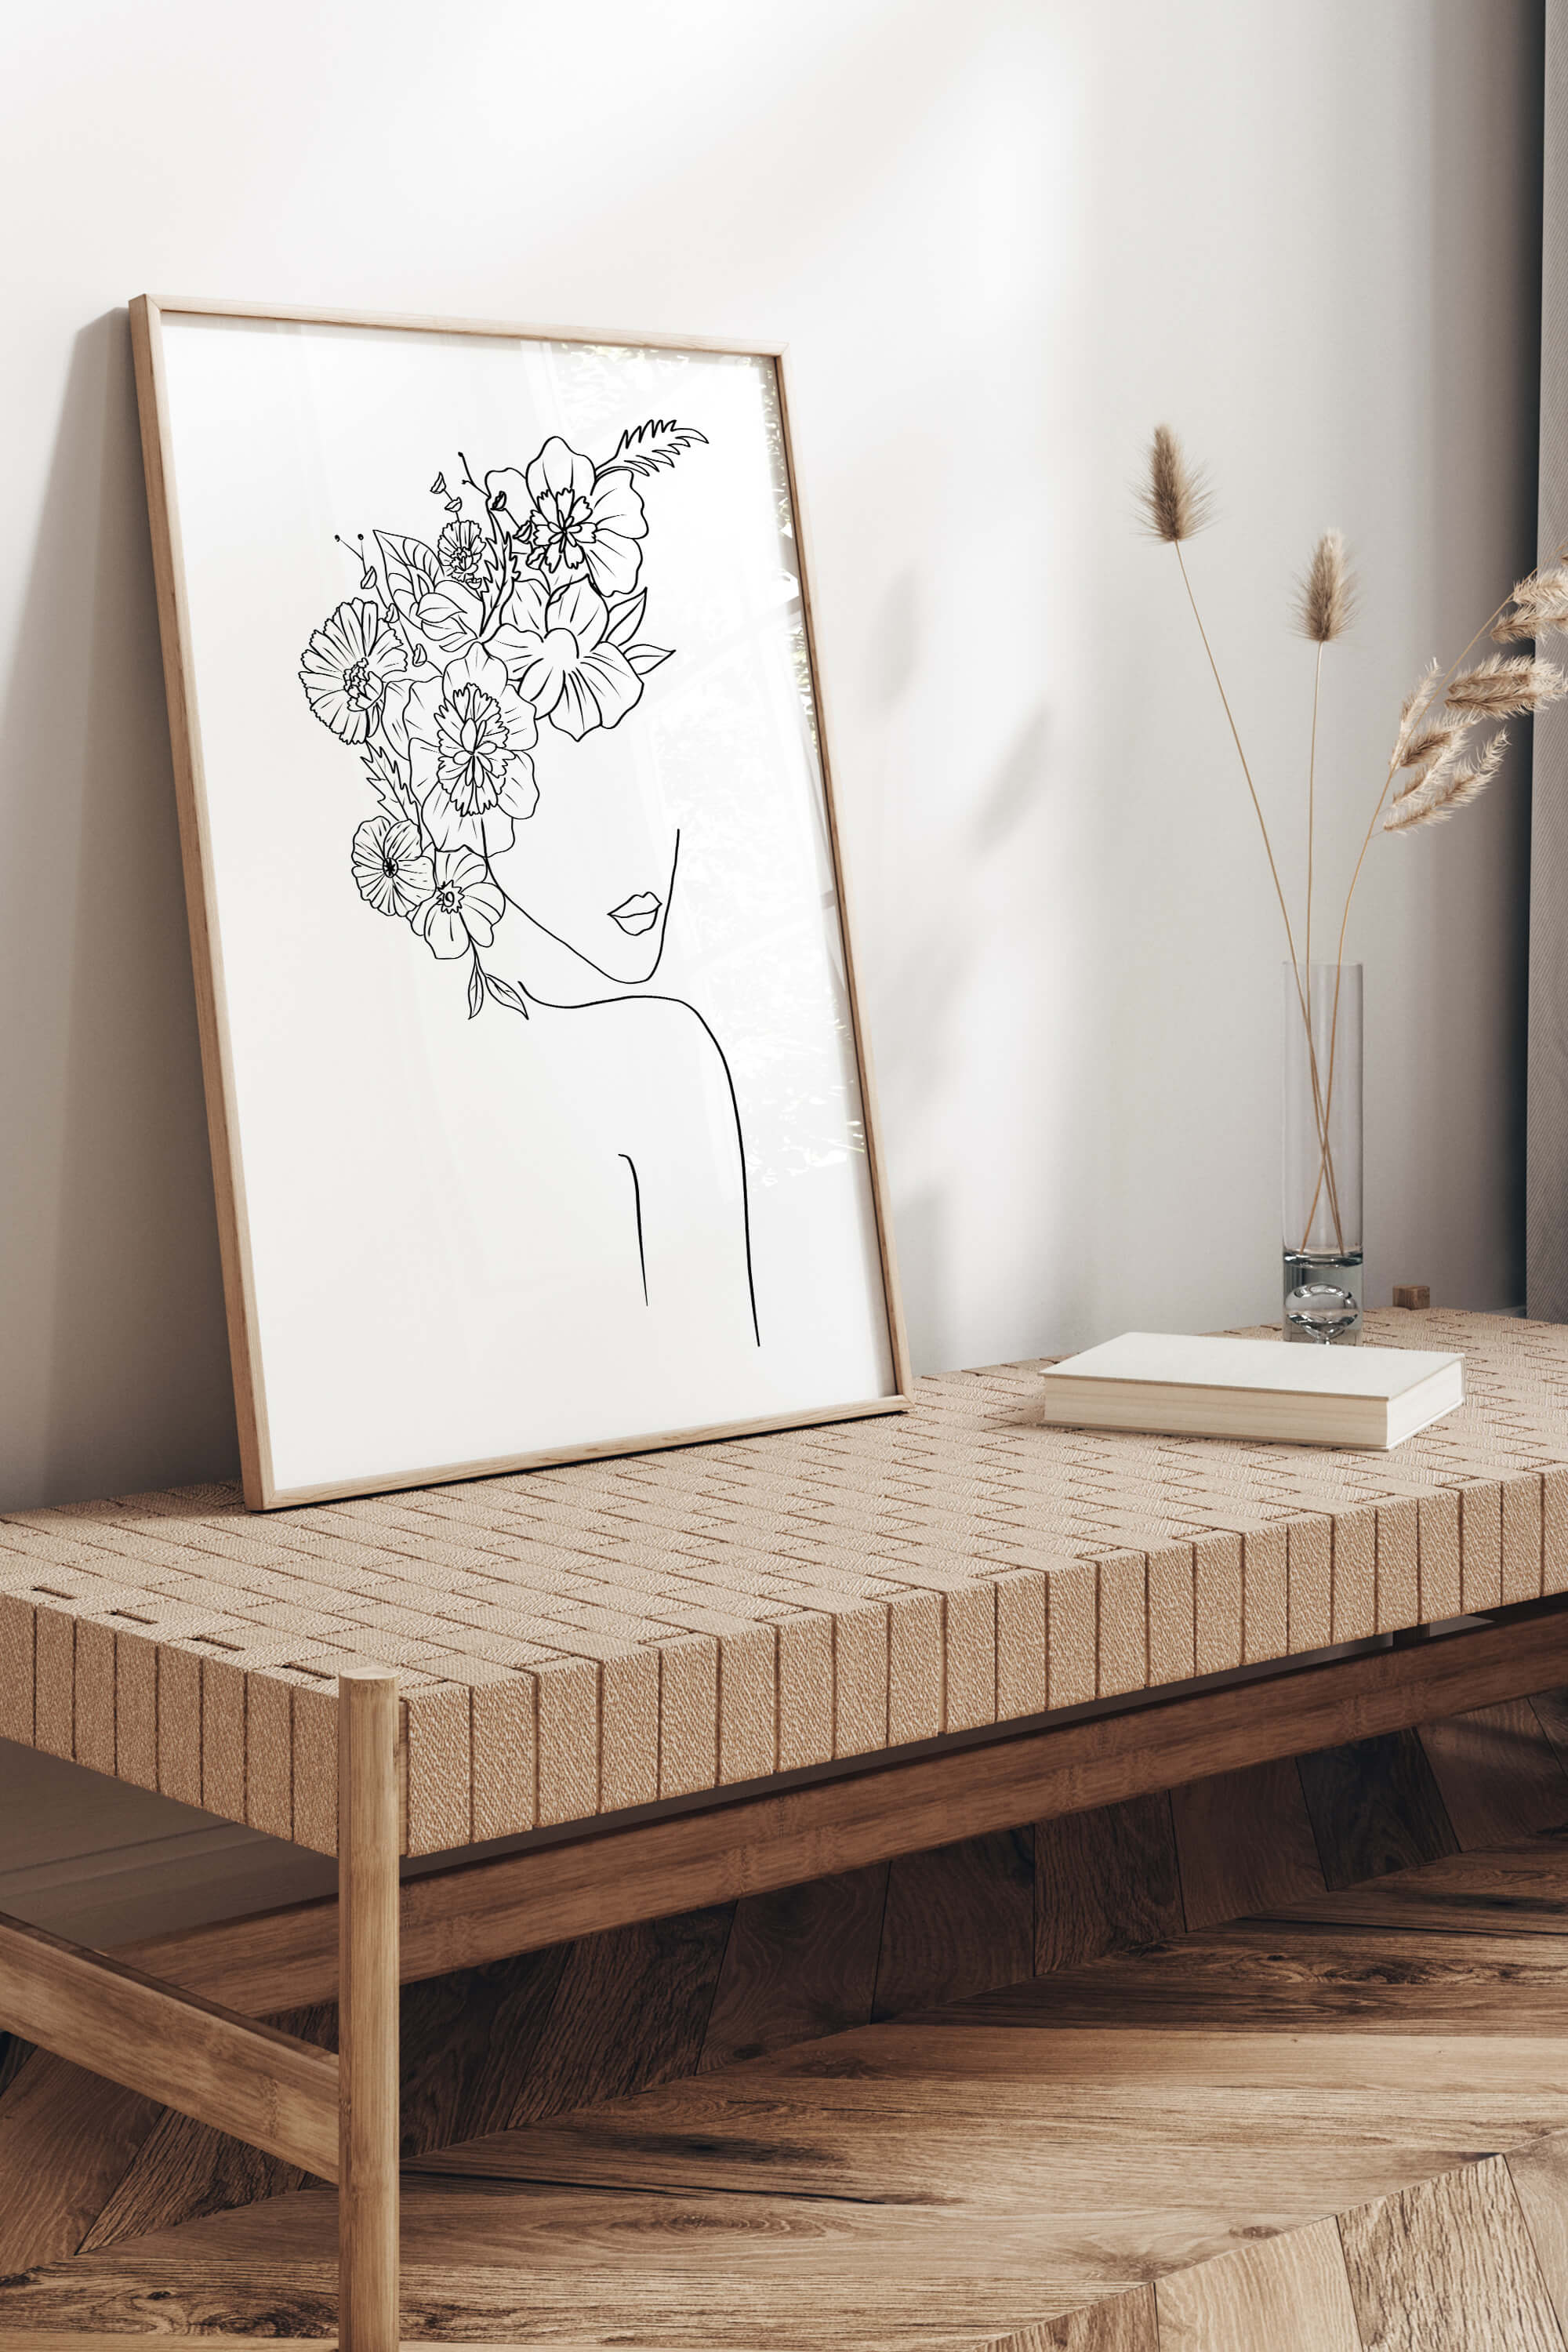 Explore the mysterious beauty of this flower head artwork. Vibrant and captivating, the image features a woman with floral elements, creating a unique and eye-catching wall decor piece.